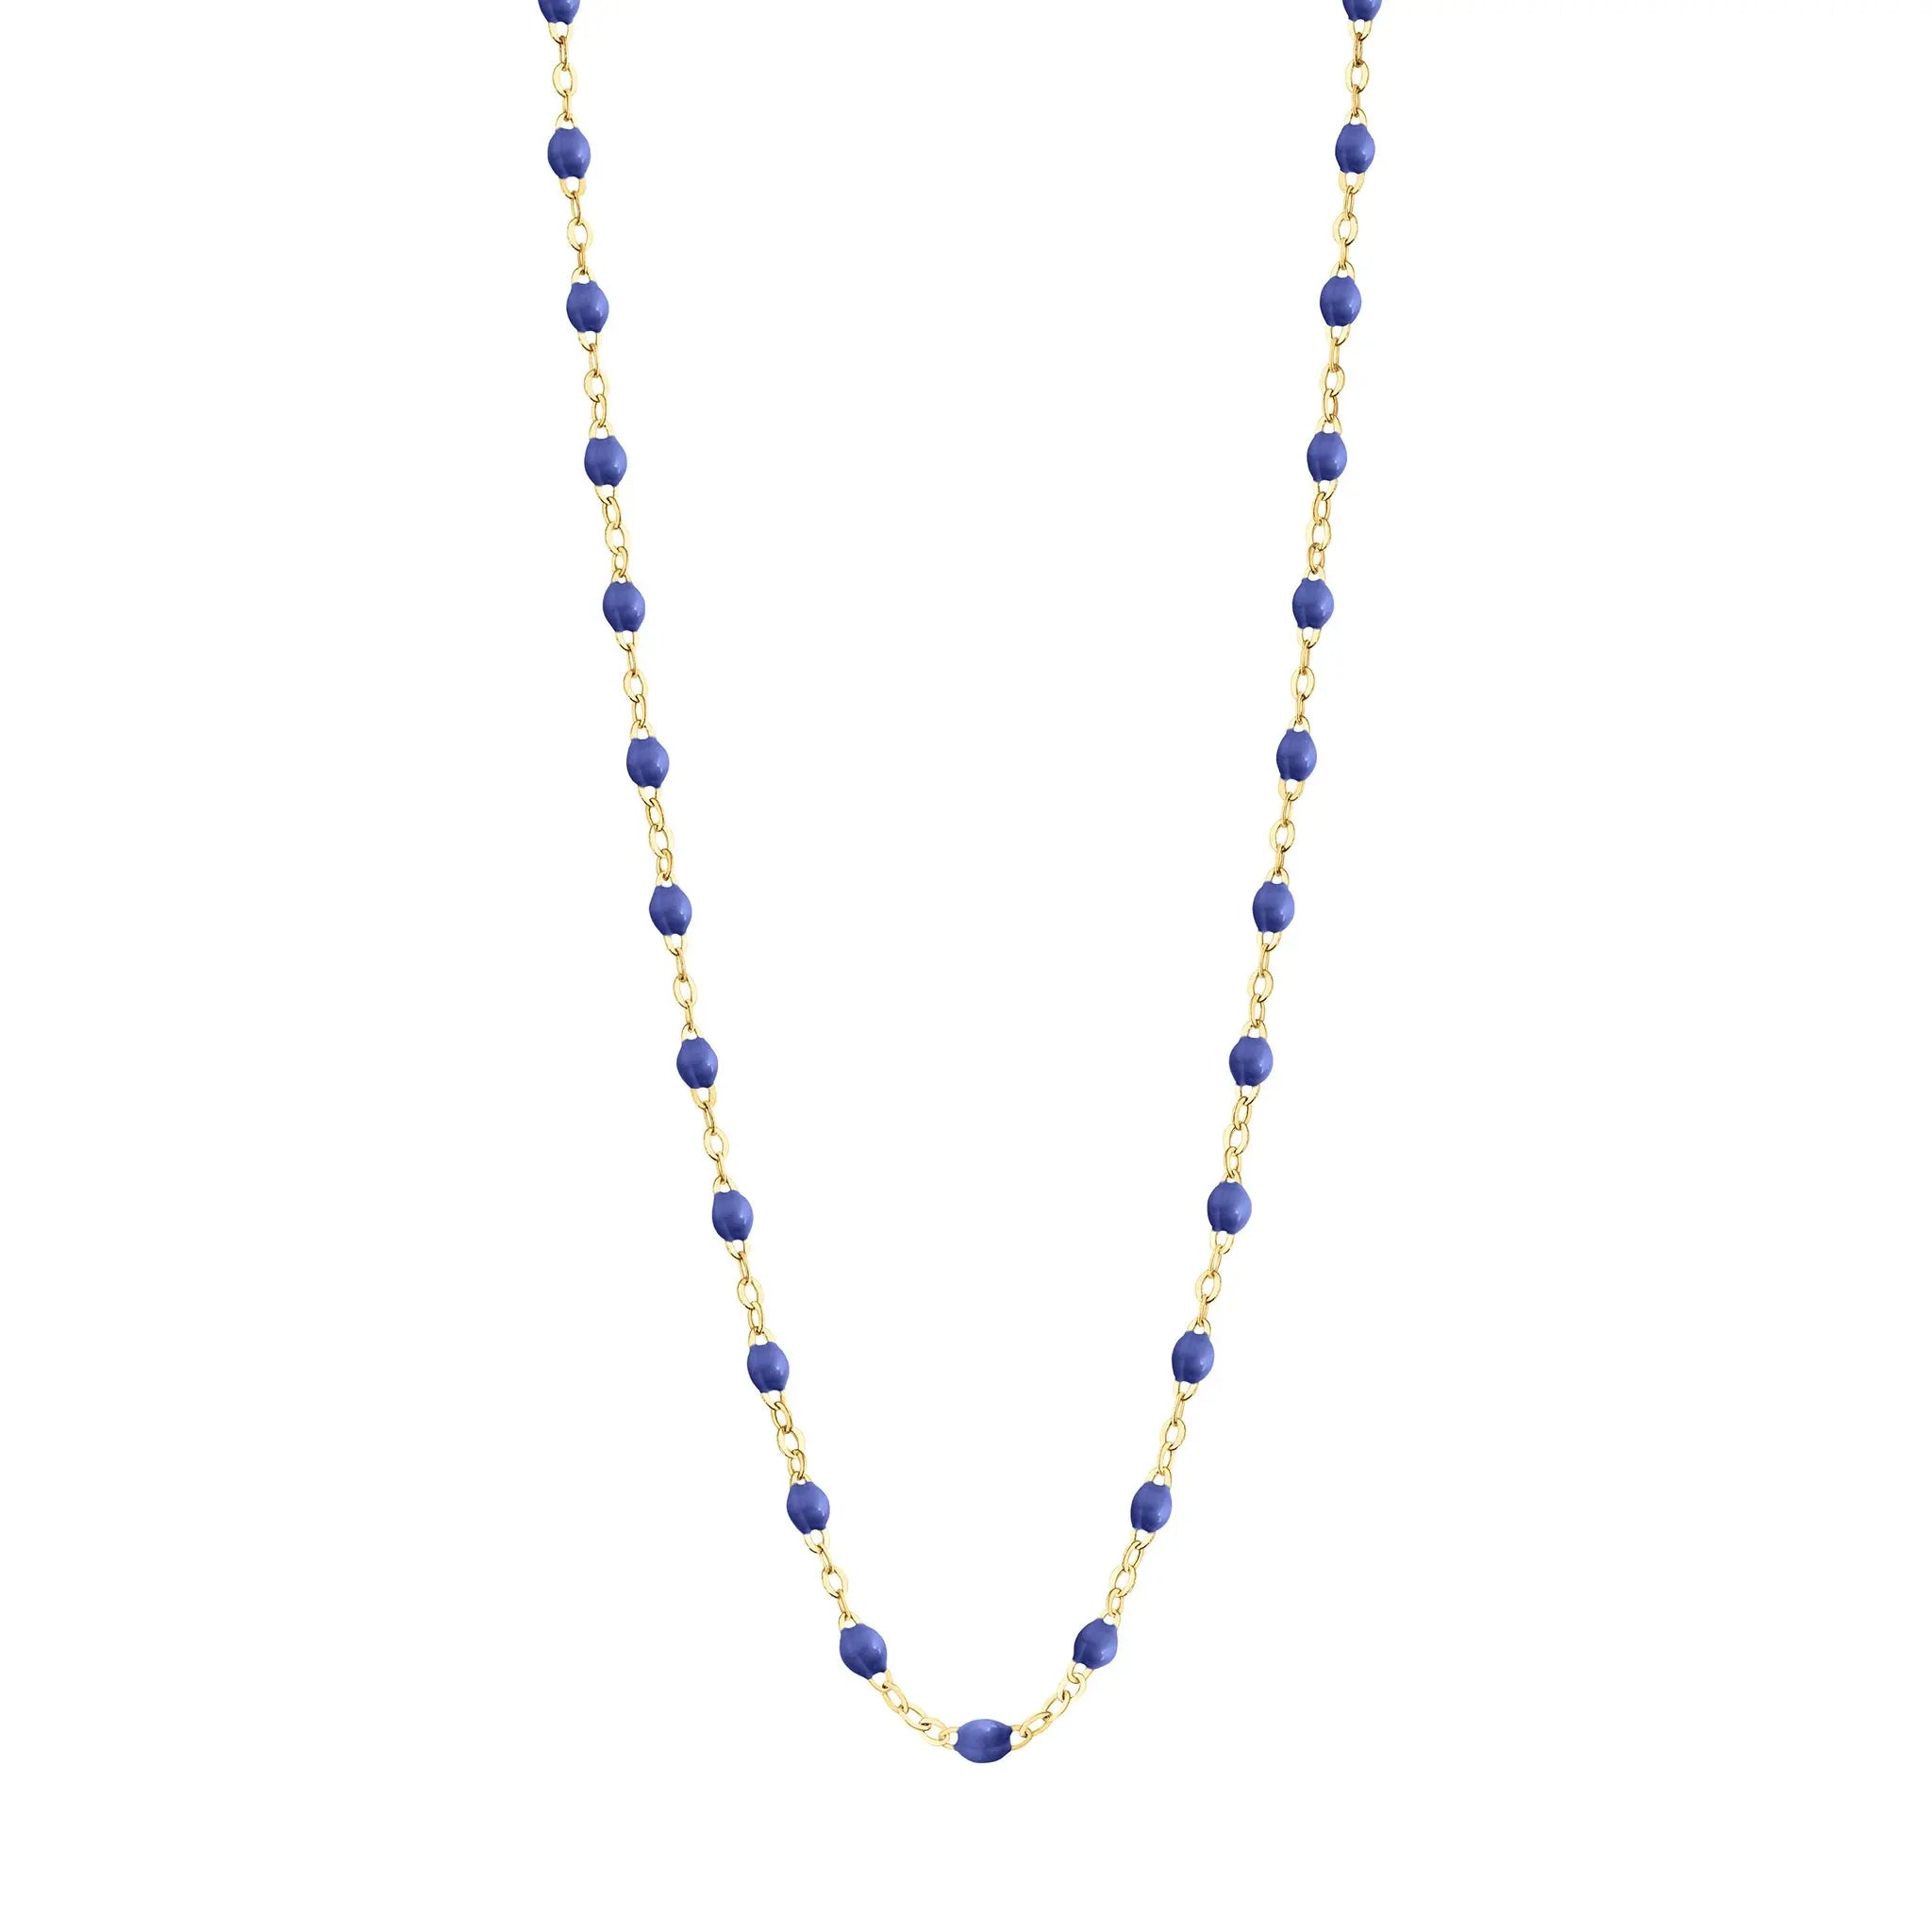 Stack you necklace layers with this versatile beaded chain! The Classic Gigi Necklace by gigi CLOZEAU features 18 carat yellow gold, and striking Blue resin jewels for an everyday effortless appearance. Handcrafted in 18k yellow gold. The beads measure 1.50mm in diameter and is finished with a spring ring clasp. The length is 19.7 inches.